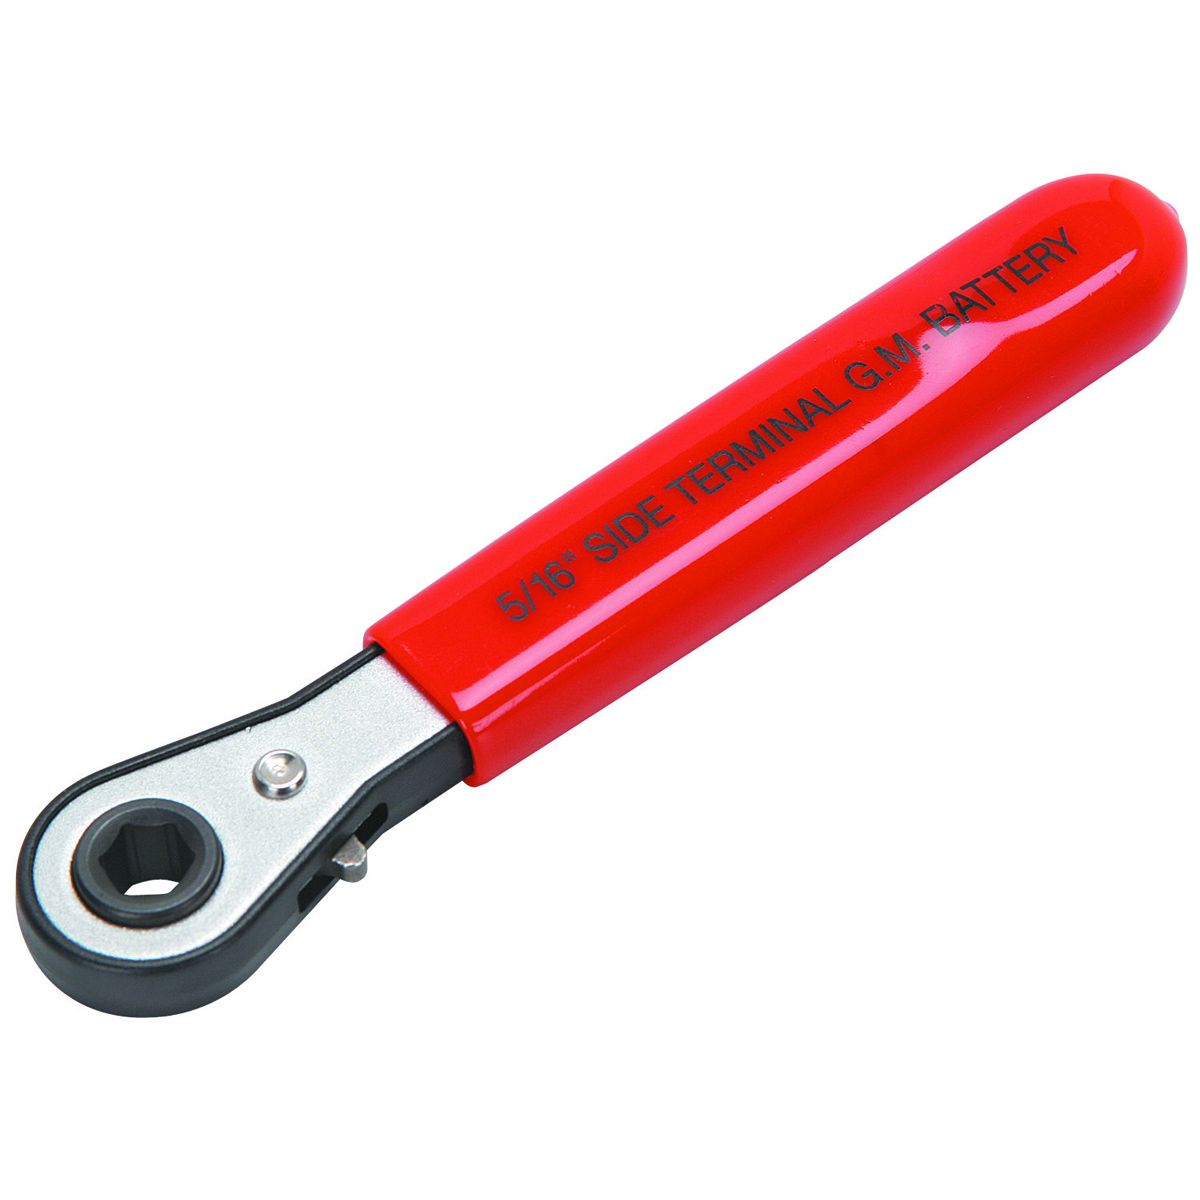 PITTSBURGH AUTOMOTIVE 5/16" Side-Terminal Battery Ratchet Wrench